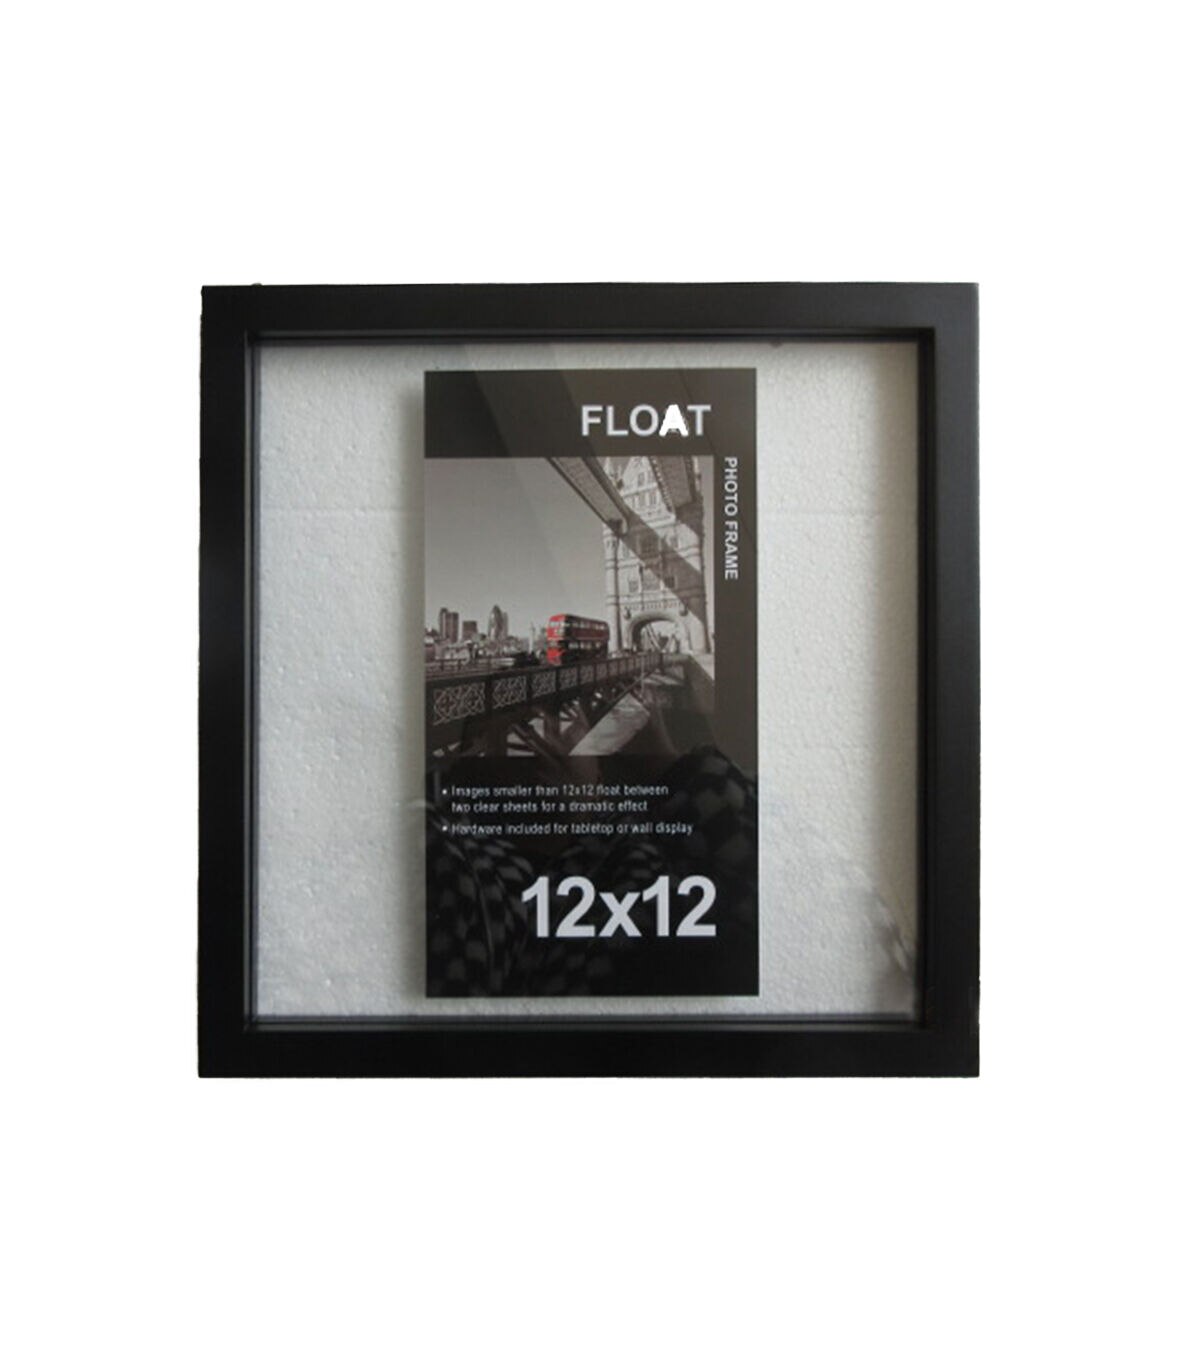 12 picture photo frame